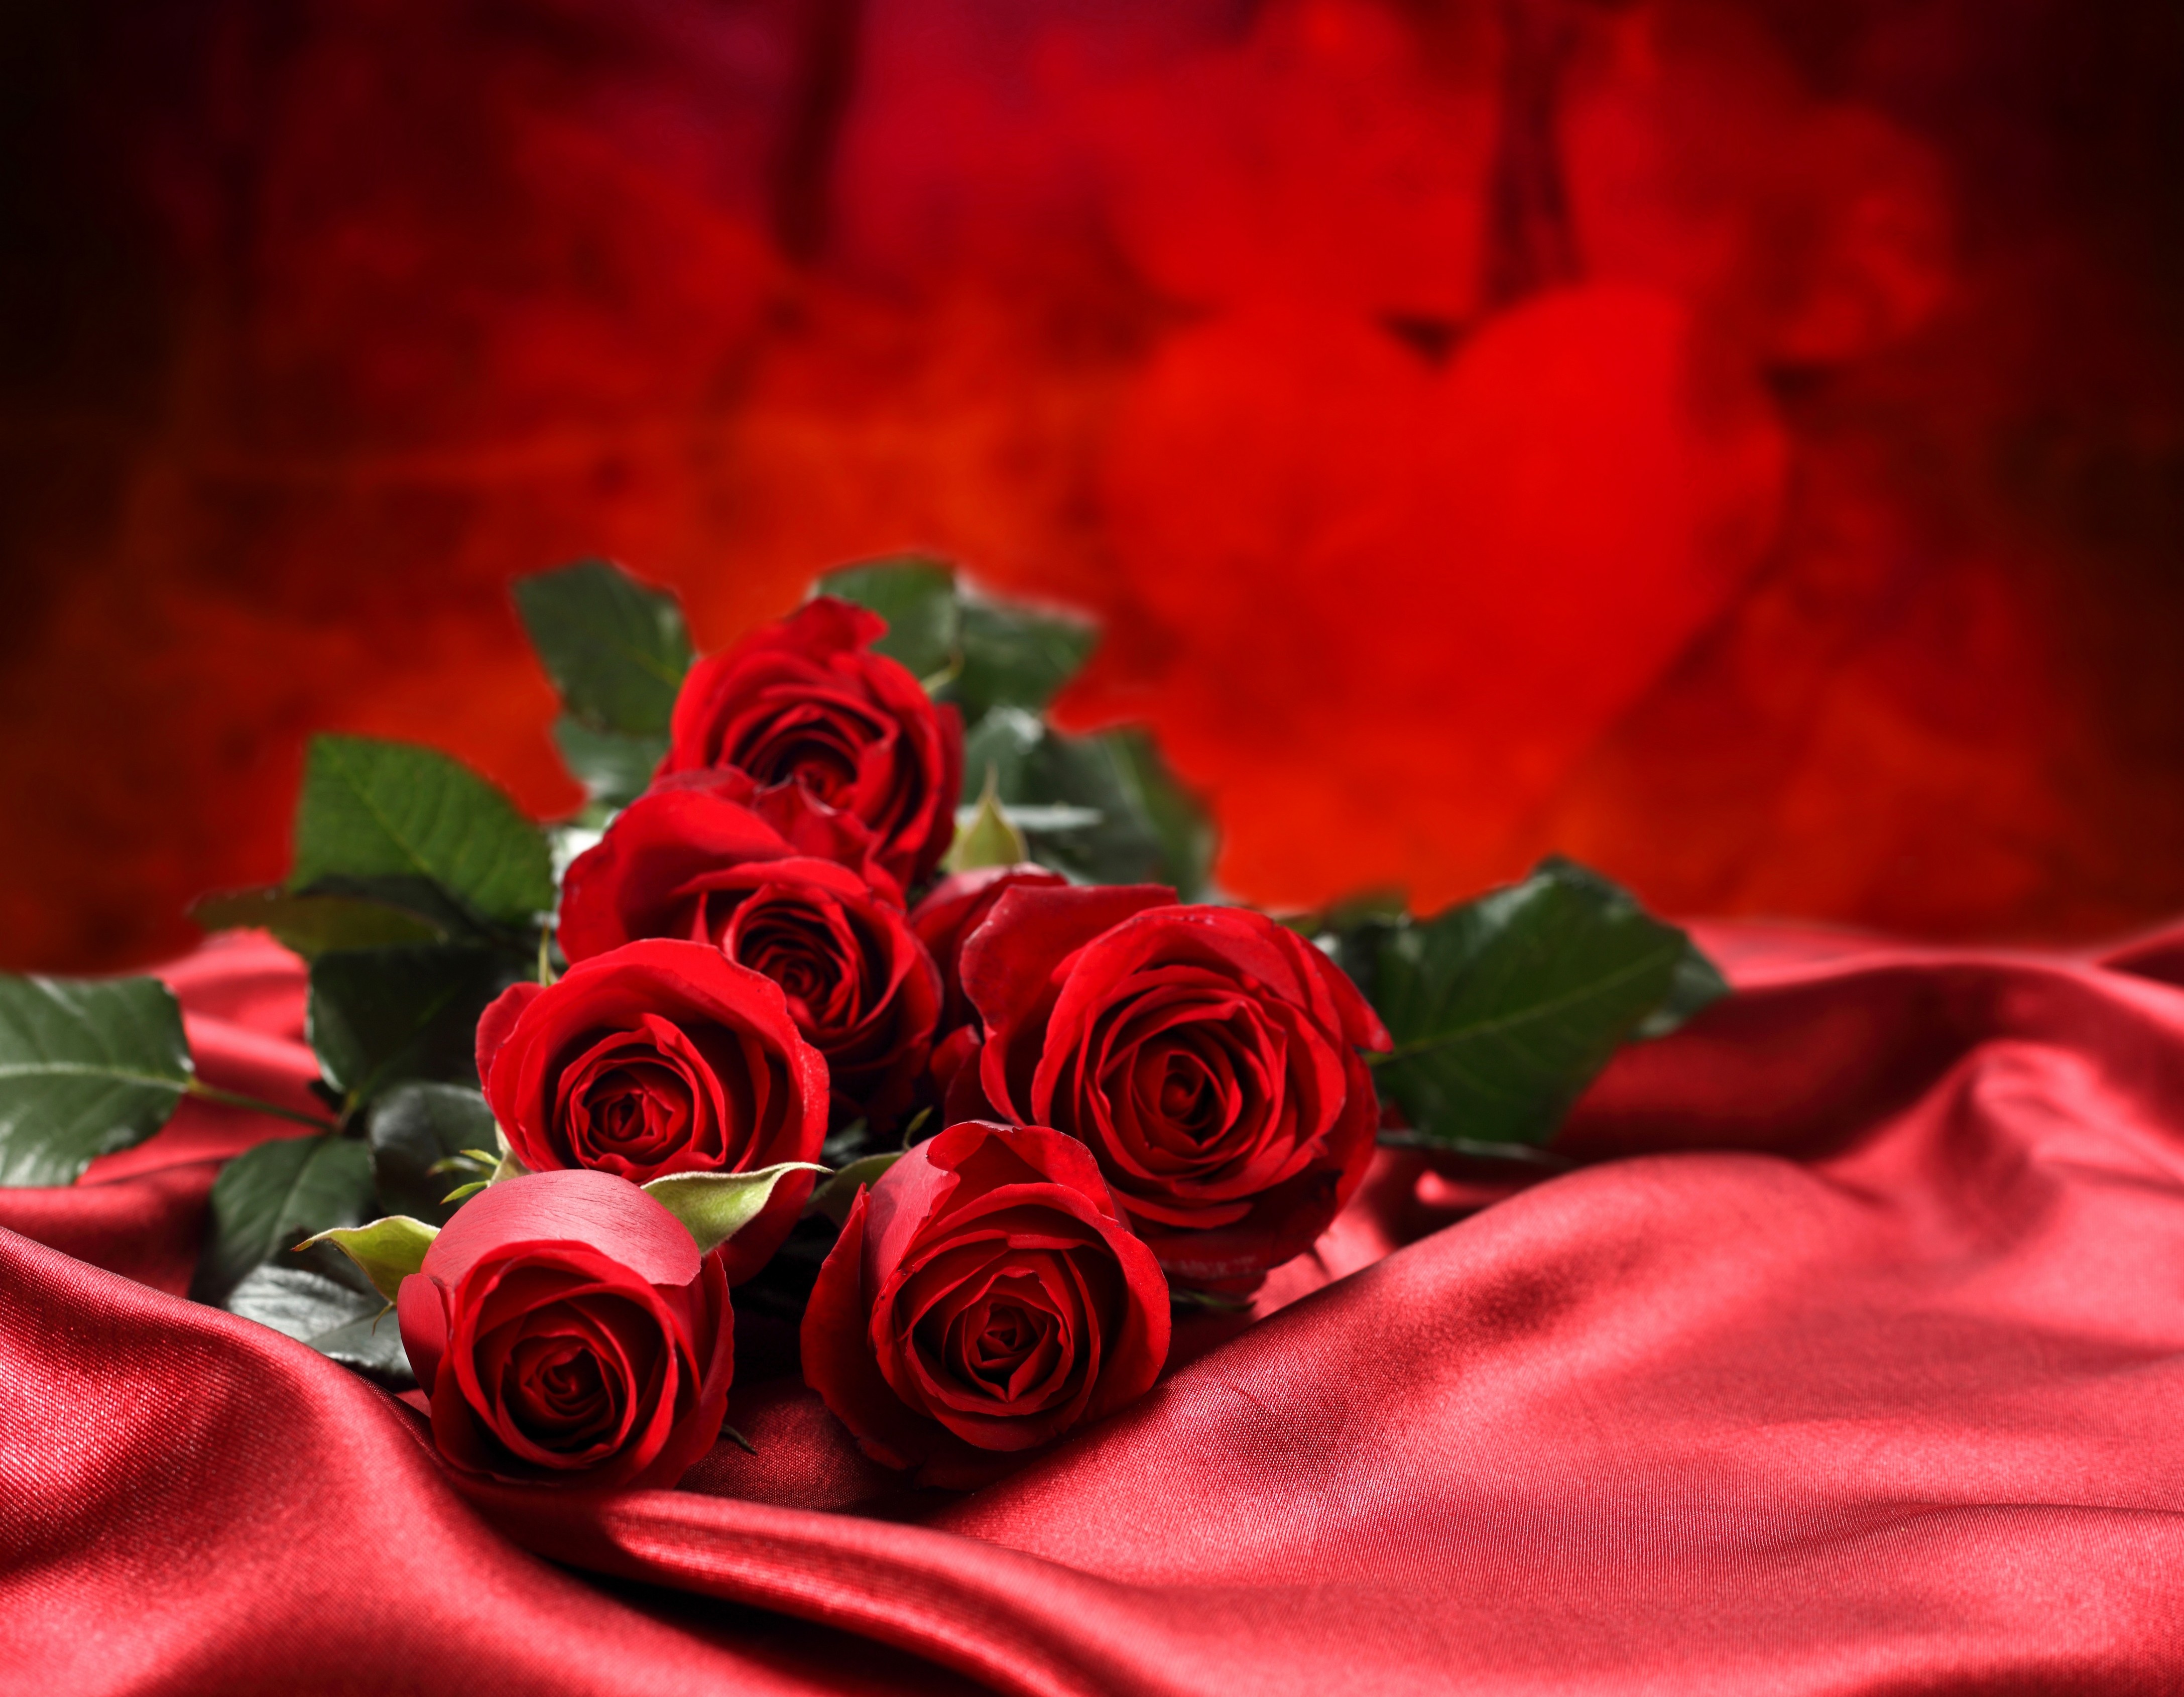 Flowers Red Rose 5 wallpapers (Desktop, Phone, Tablet) - Awesome ...